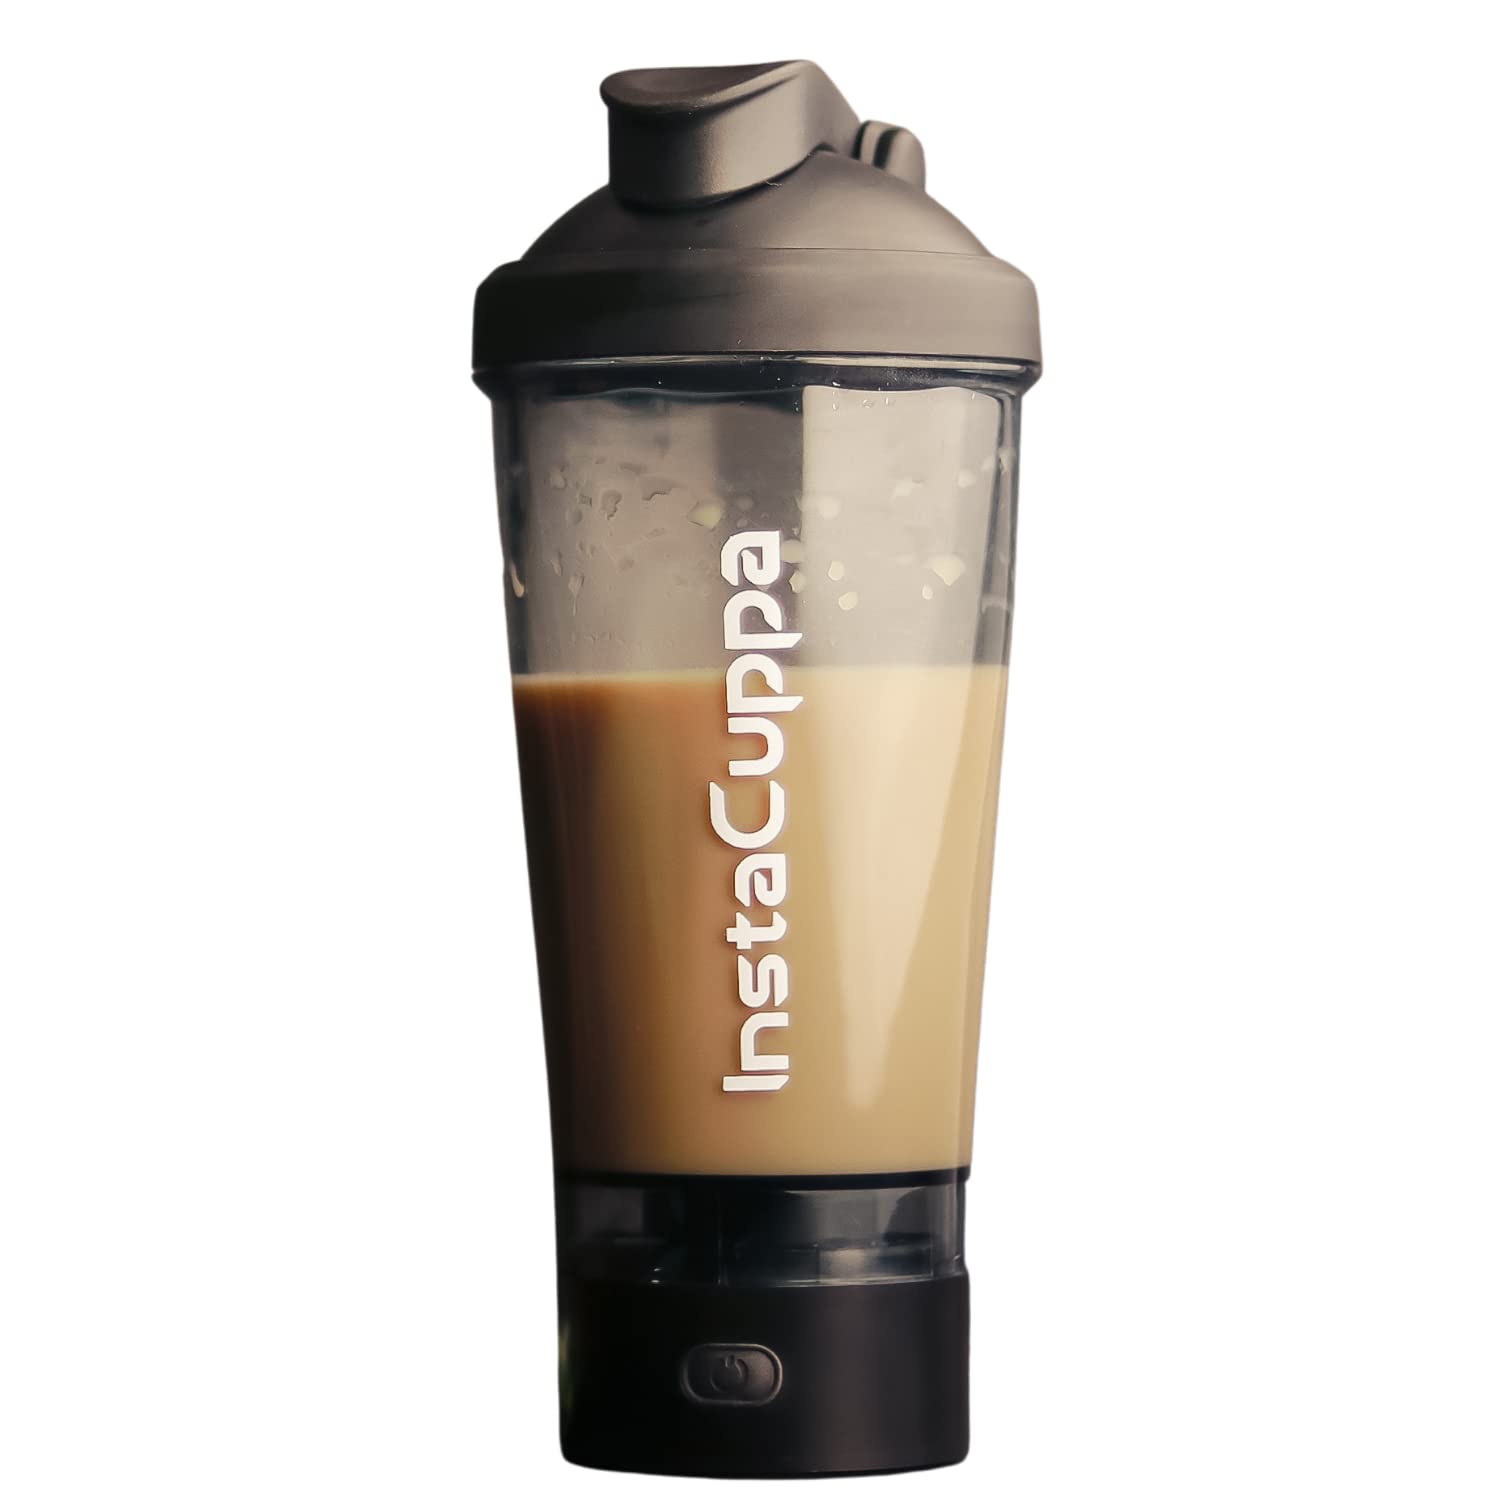 InstaCuppa Electric Protein Shaker - USB Rechargeable for Busy